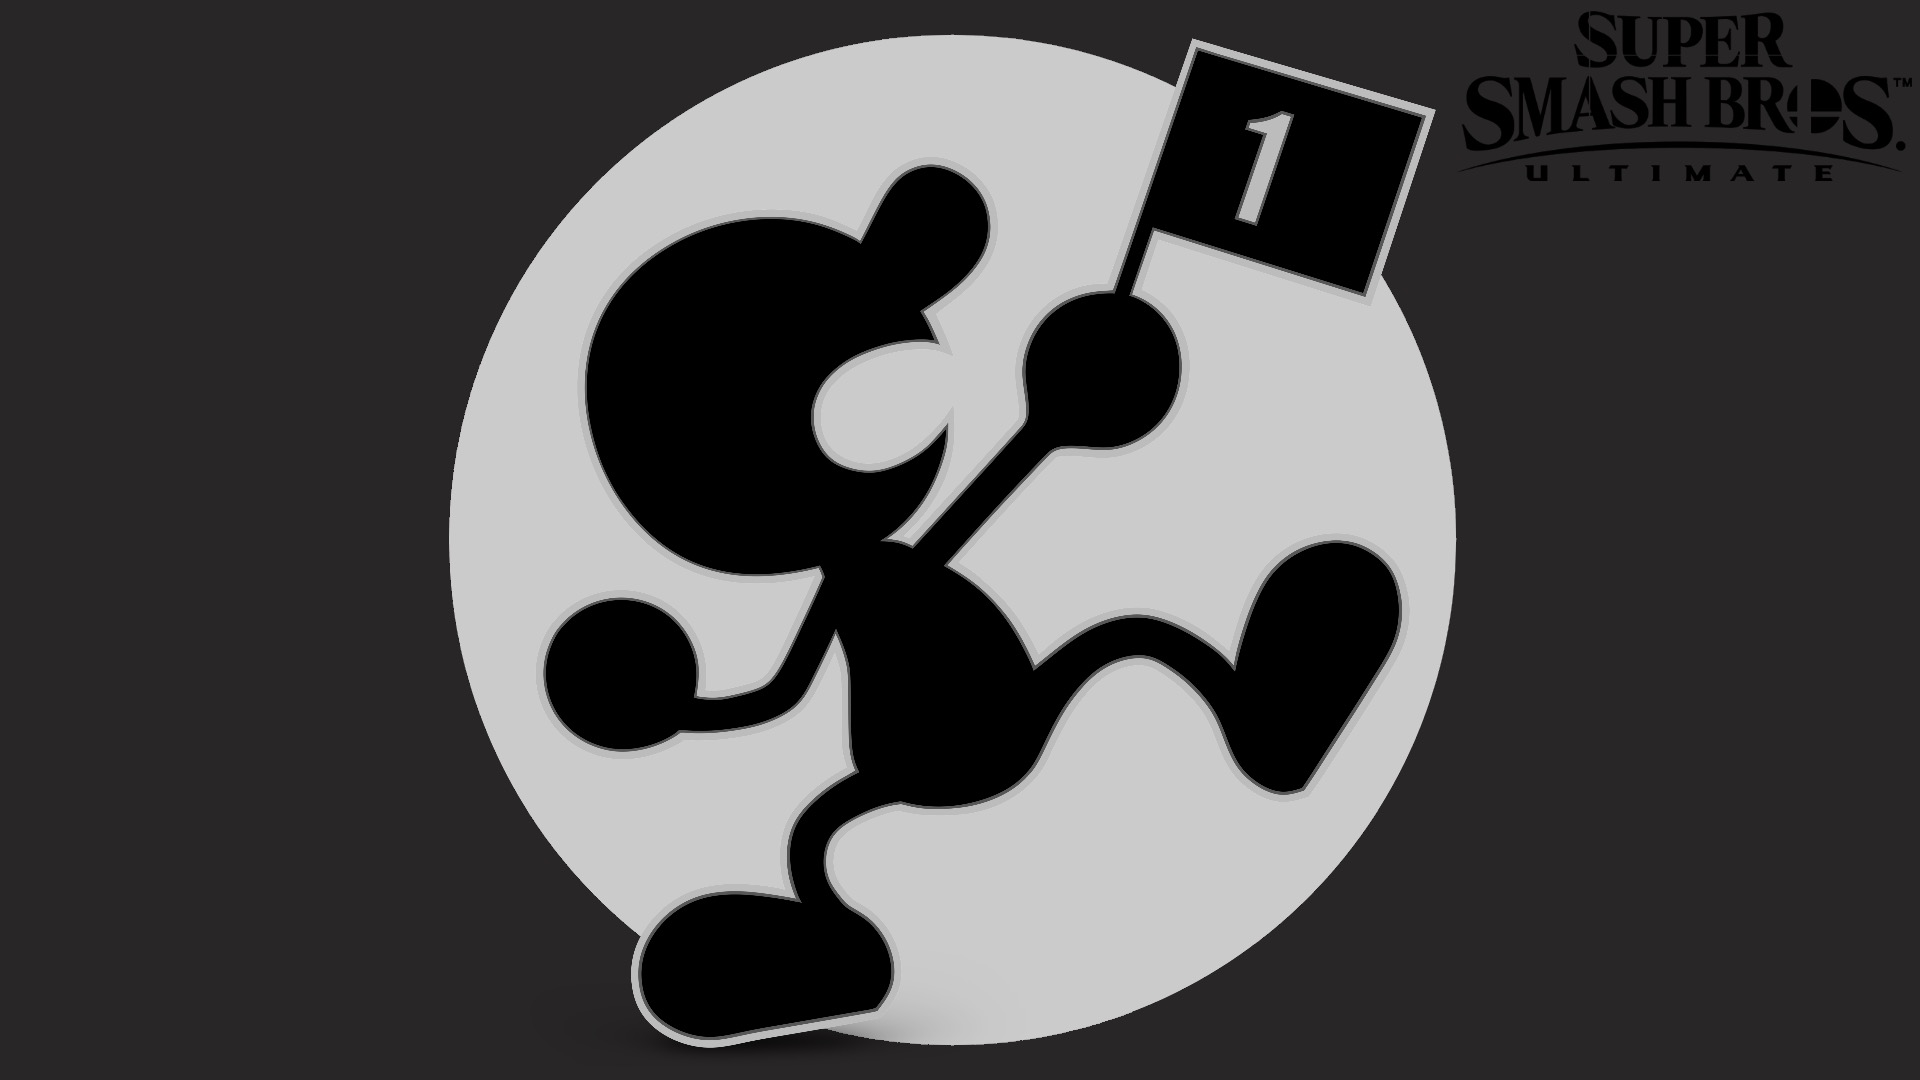 Mr Game And Watch Super Smash Bros Ultimate 1920x1080